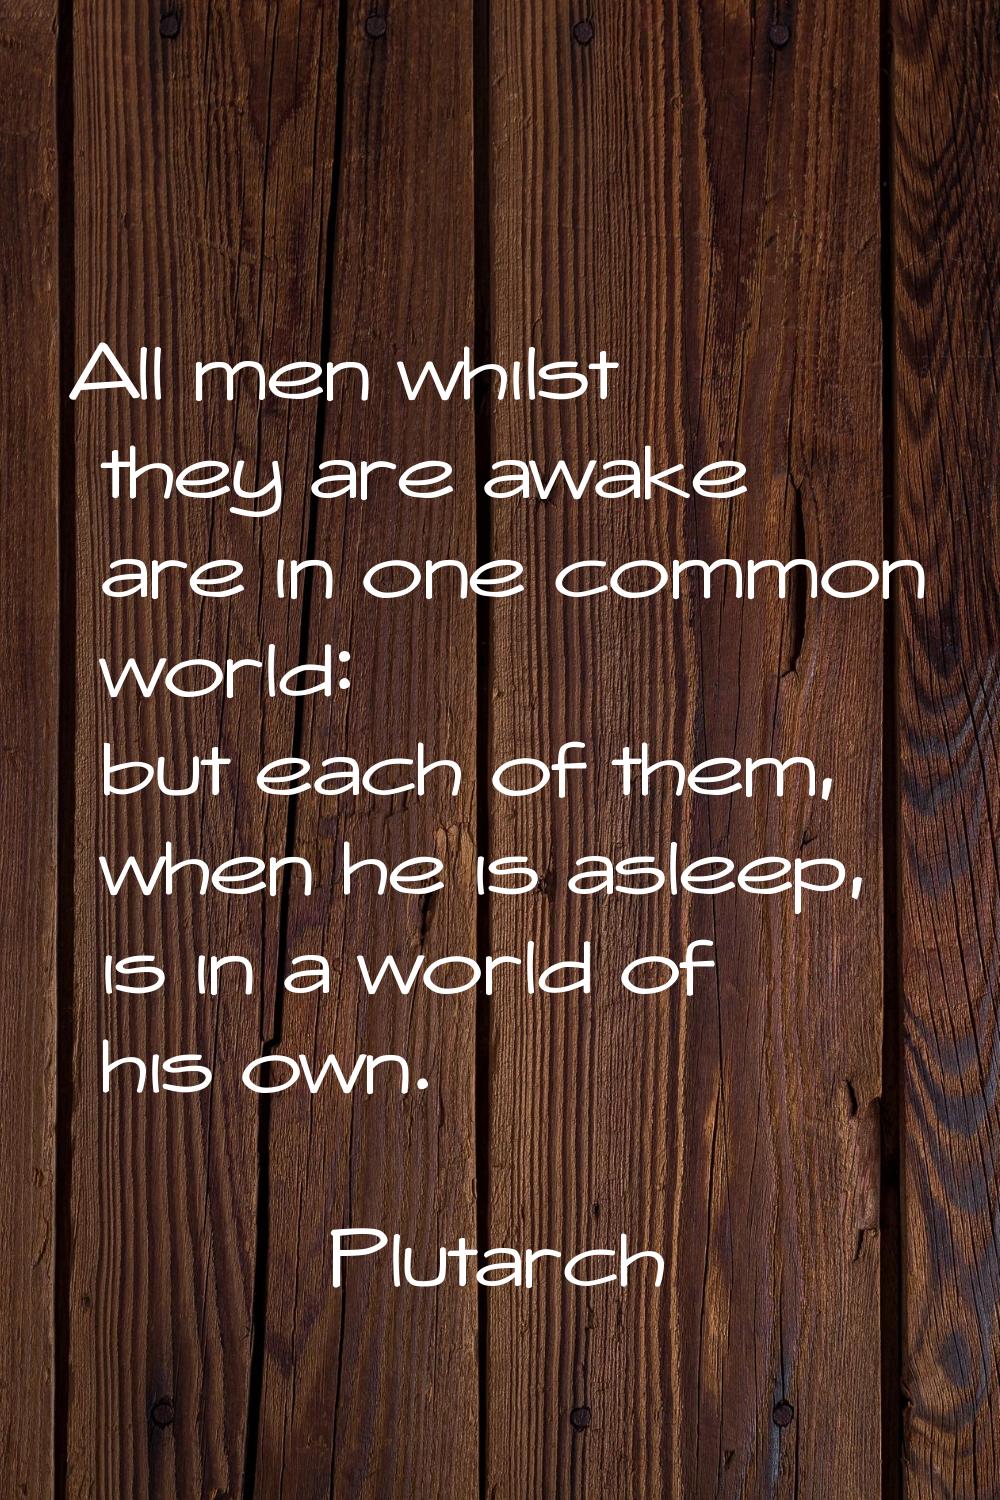 All men whilst they are awake are in one common world: but each of them, when he is asleep, is in a